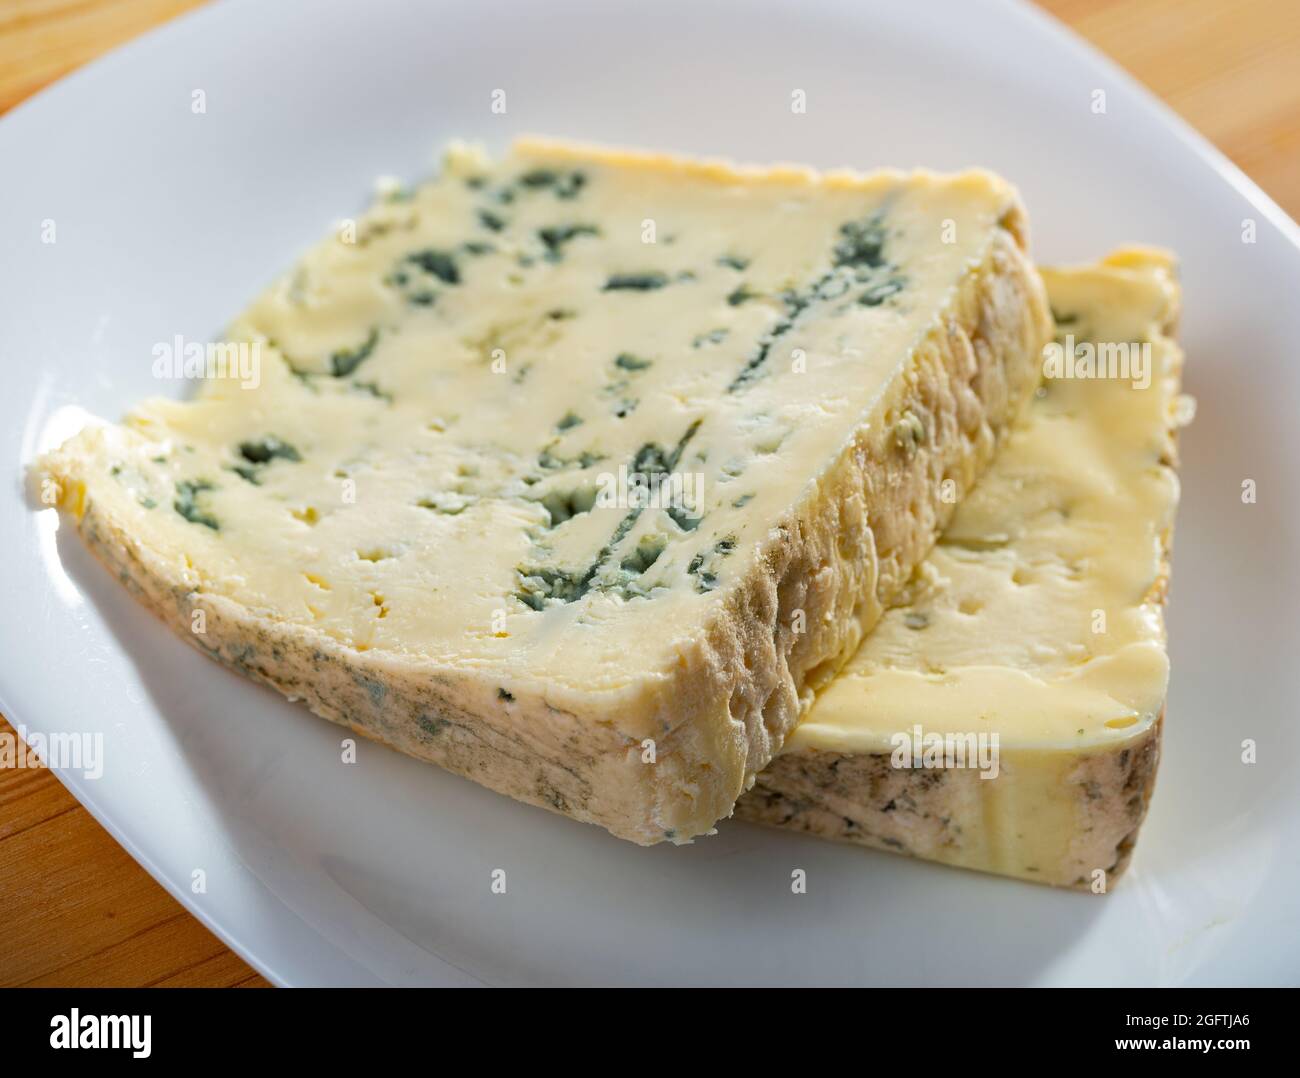 Blue cheese on plate Stock Photo